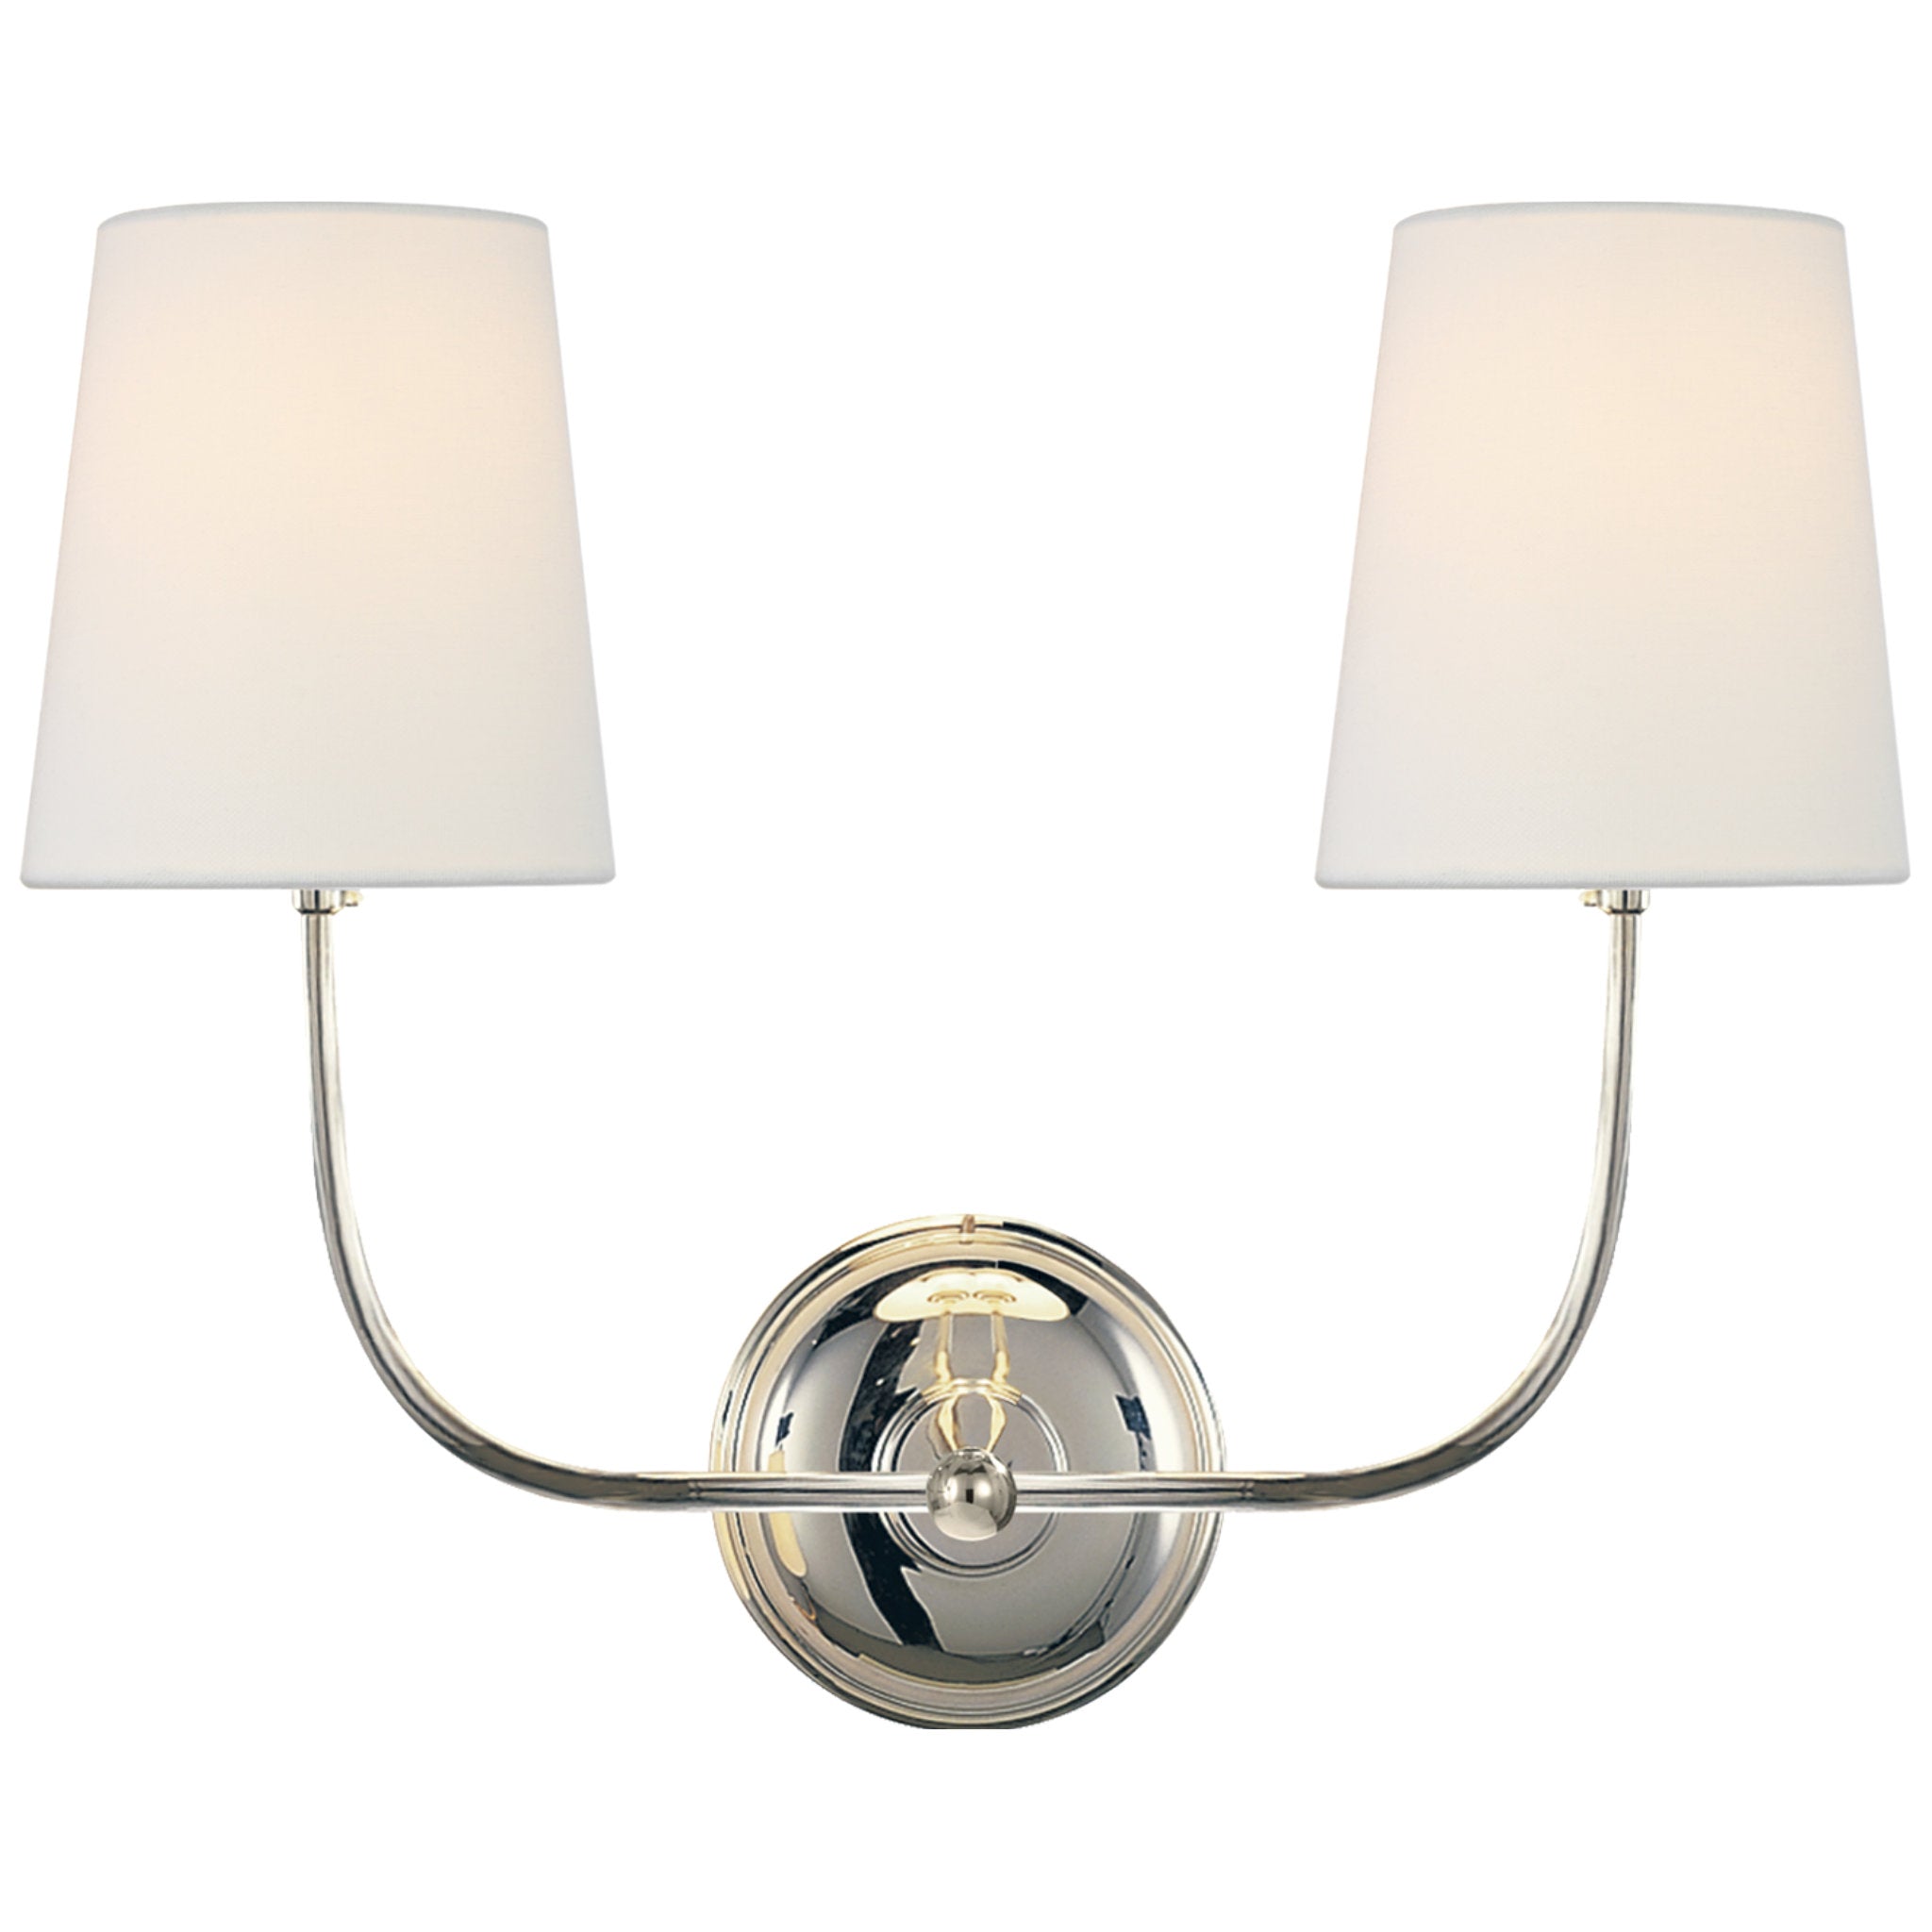 Thomas O'Brien Vendome Double Sconce in Polished Nickel with Linen Shades